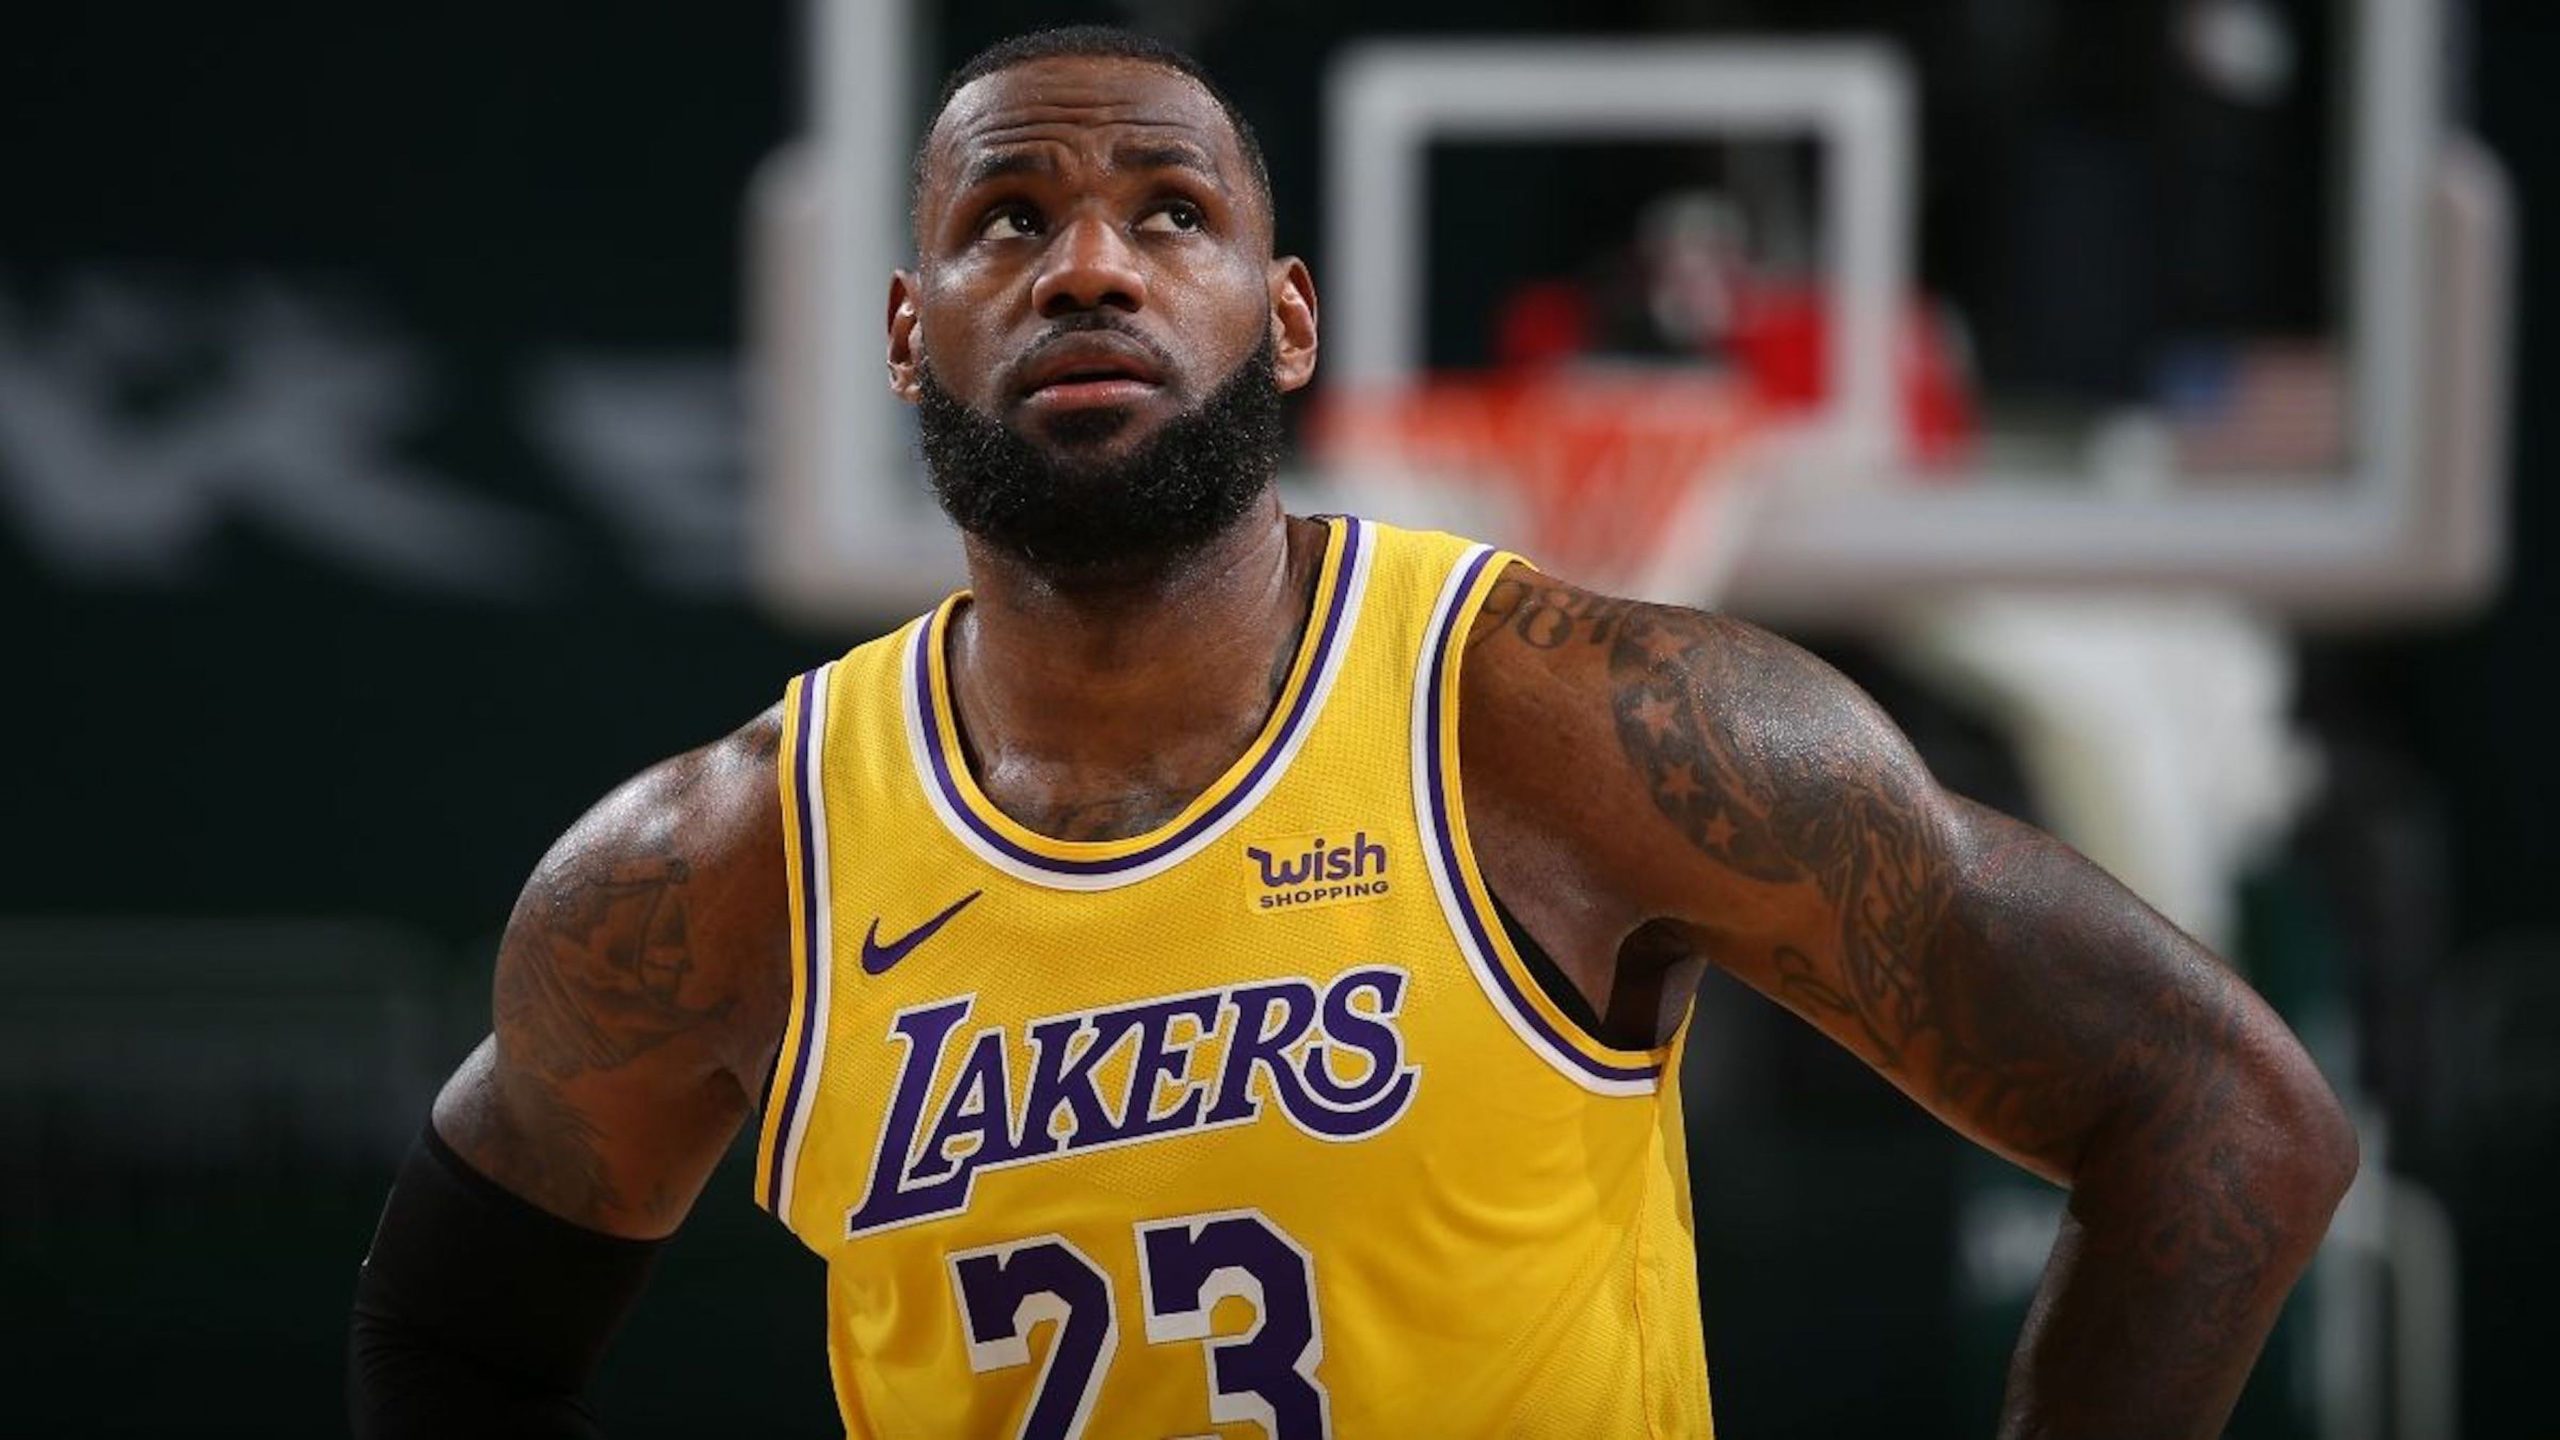 LeBron James becomes the third NBA player to reach 35,000 career